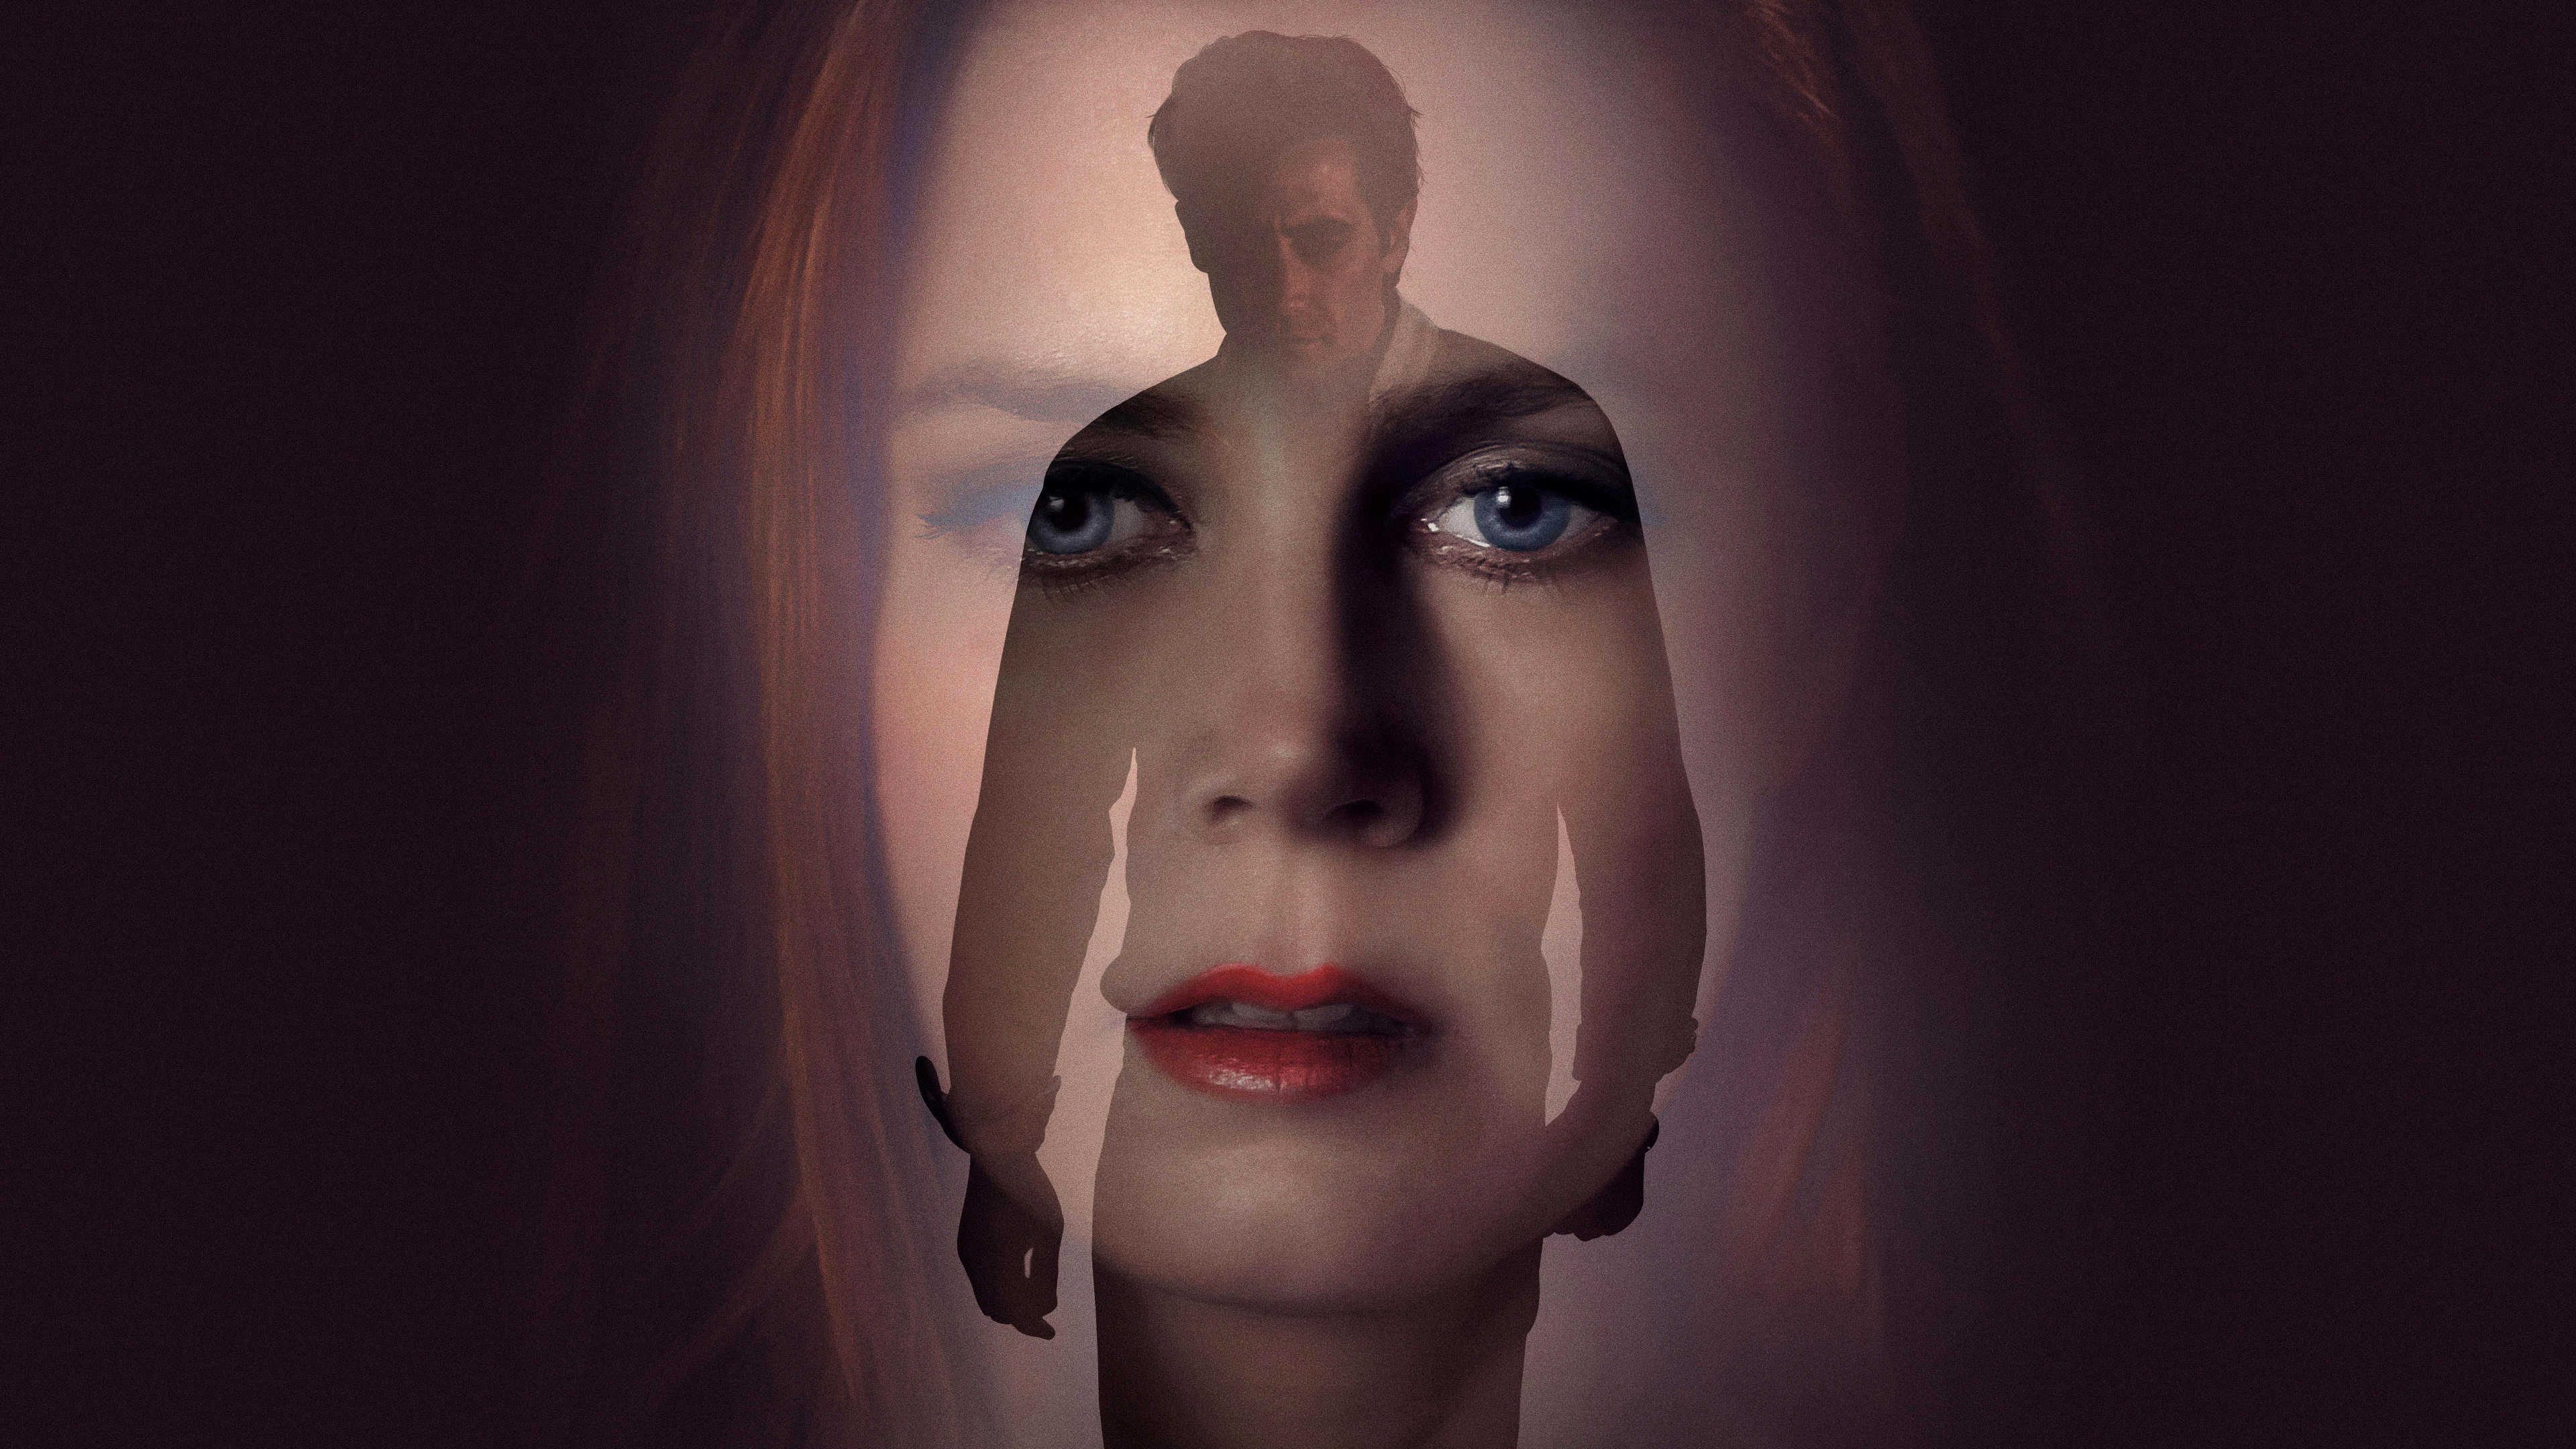 Reel Review: Nocturnal Animals